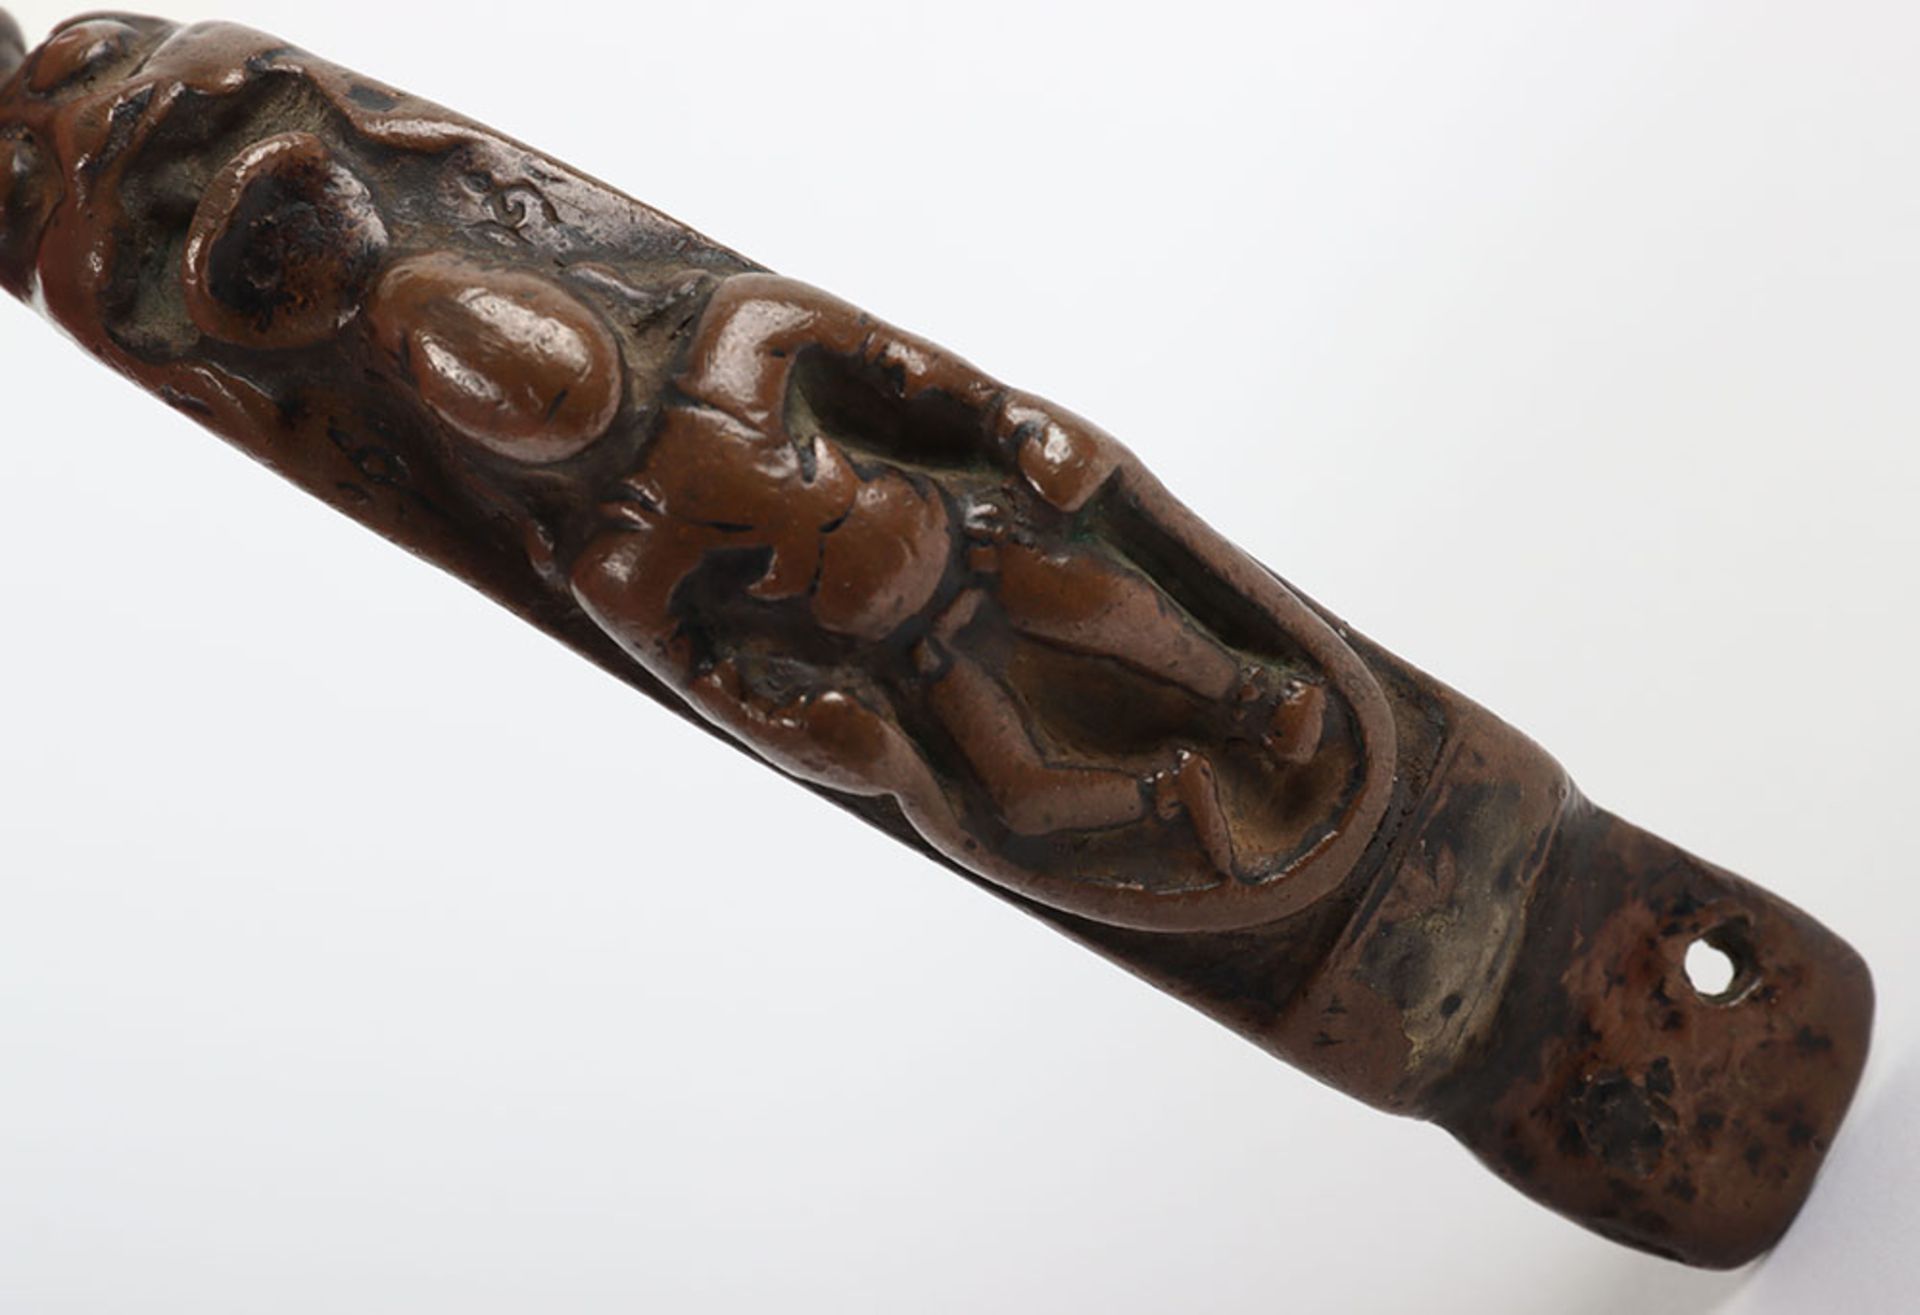 Copper Handle from an Early Indian Dagger Bich’wa, Probably 15th Century - Image 5 of 6